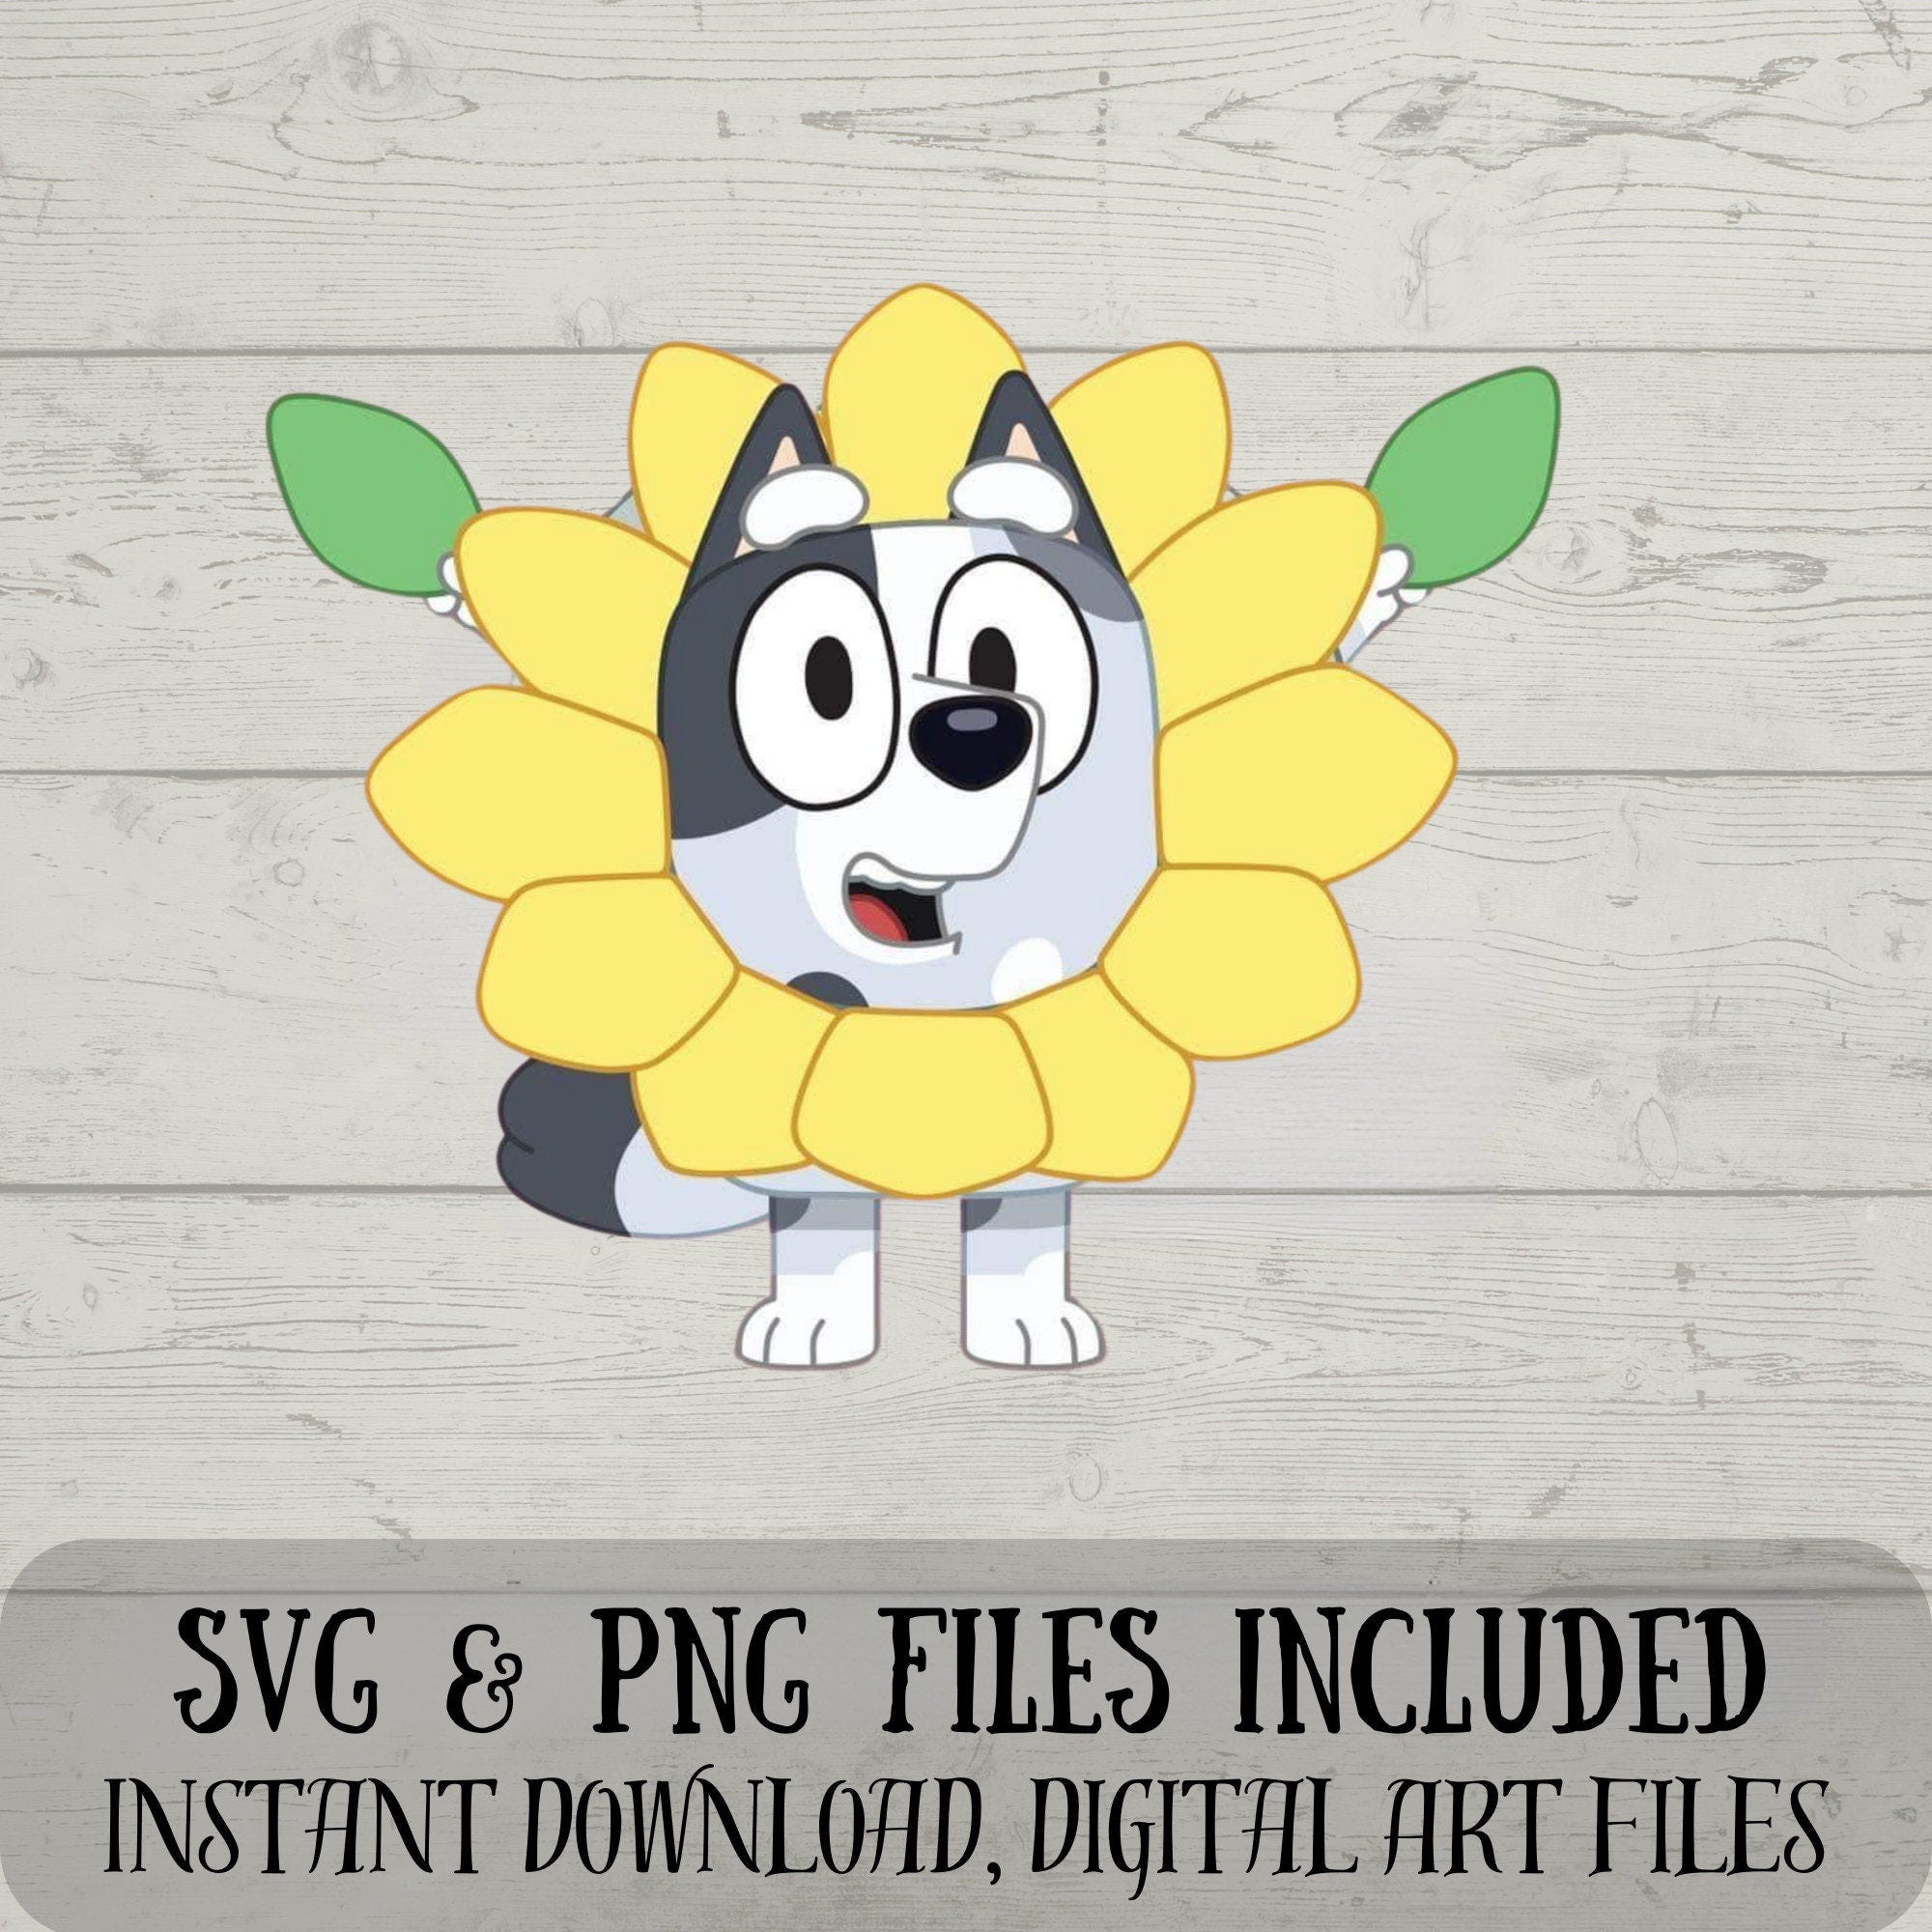 Muffin SVG - Cute Muffin SVG - Flower Muffin - Digital Download - Bluey Themed - Fun Crafting - Funny Muffin Moments - svg and png included